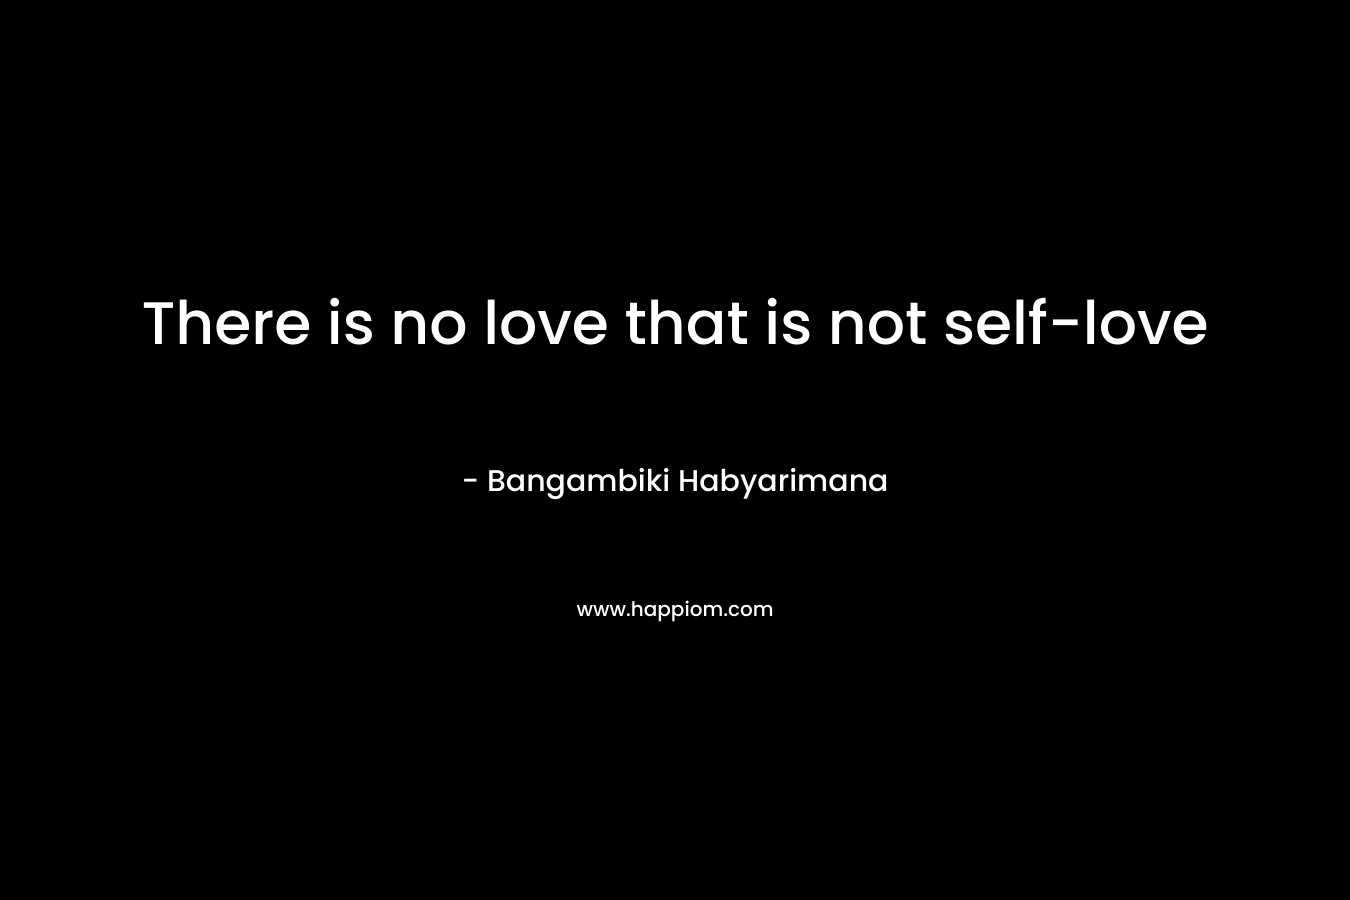 There is no love that is not self-love